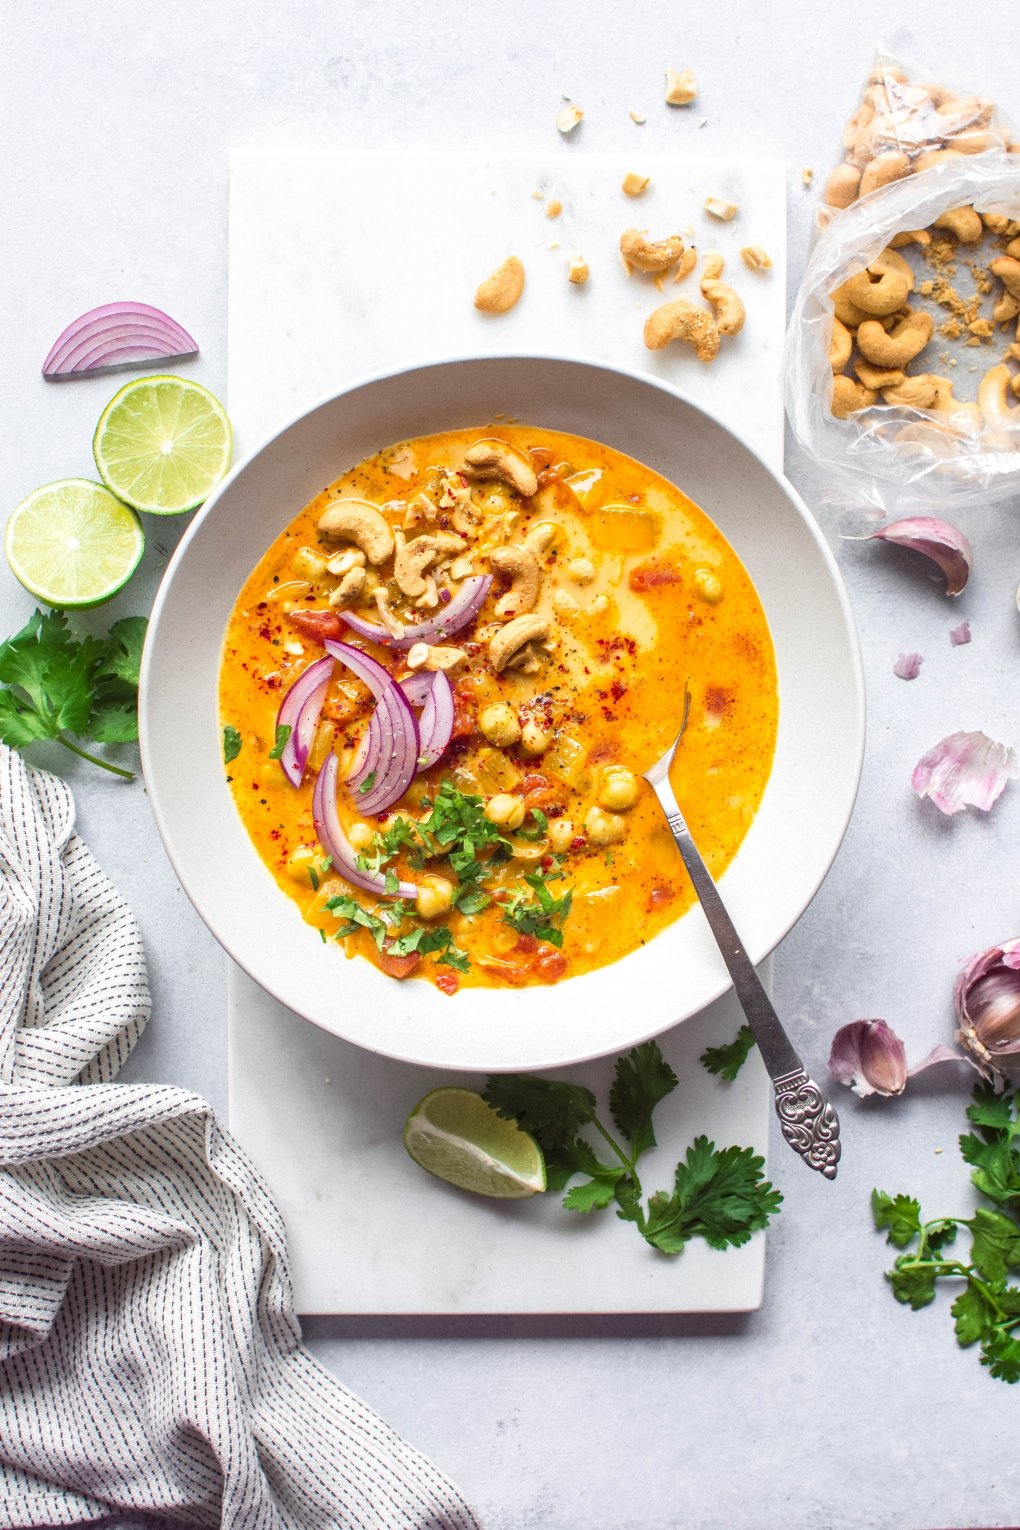 Large white bowl of bright orange chickpea and tomato coconut curry soup. Soup is topped with fresh red onion slices, chopped herbs, curry spiced cashews, and lime wedges. On a white background next to scattered herbs, lime wedges, and cashew bits.